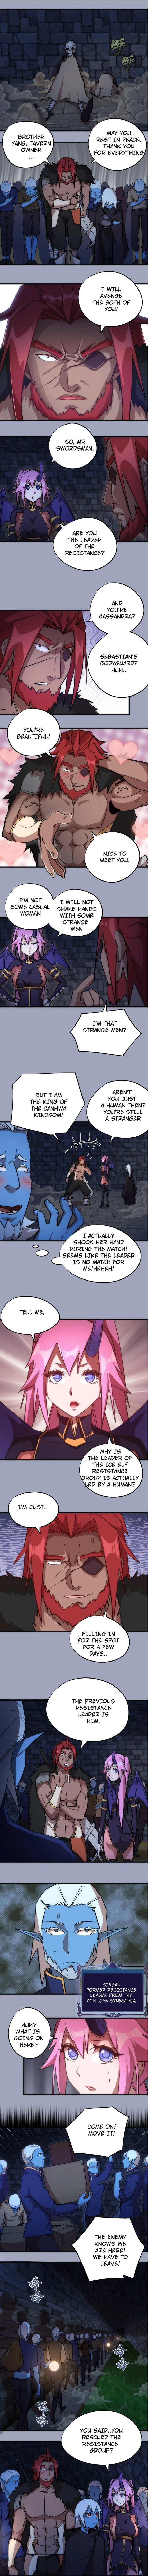 I'm Not The Overlord! - Page 3